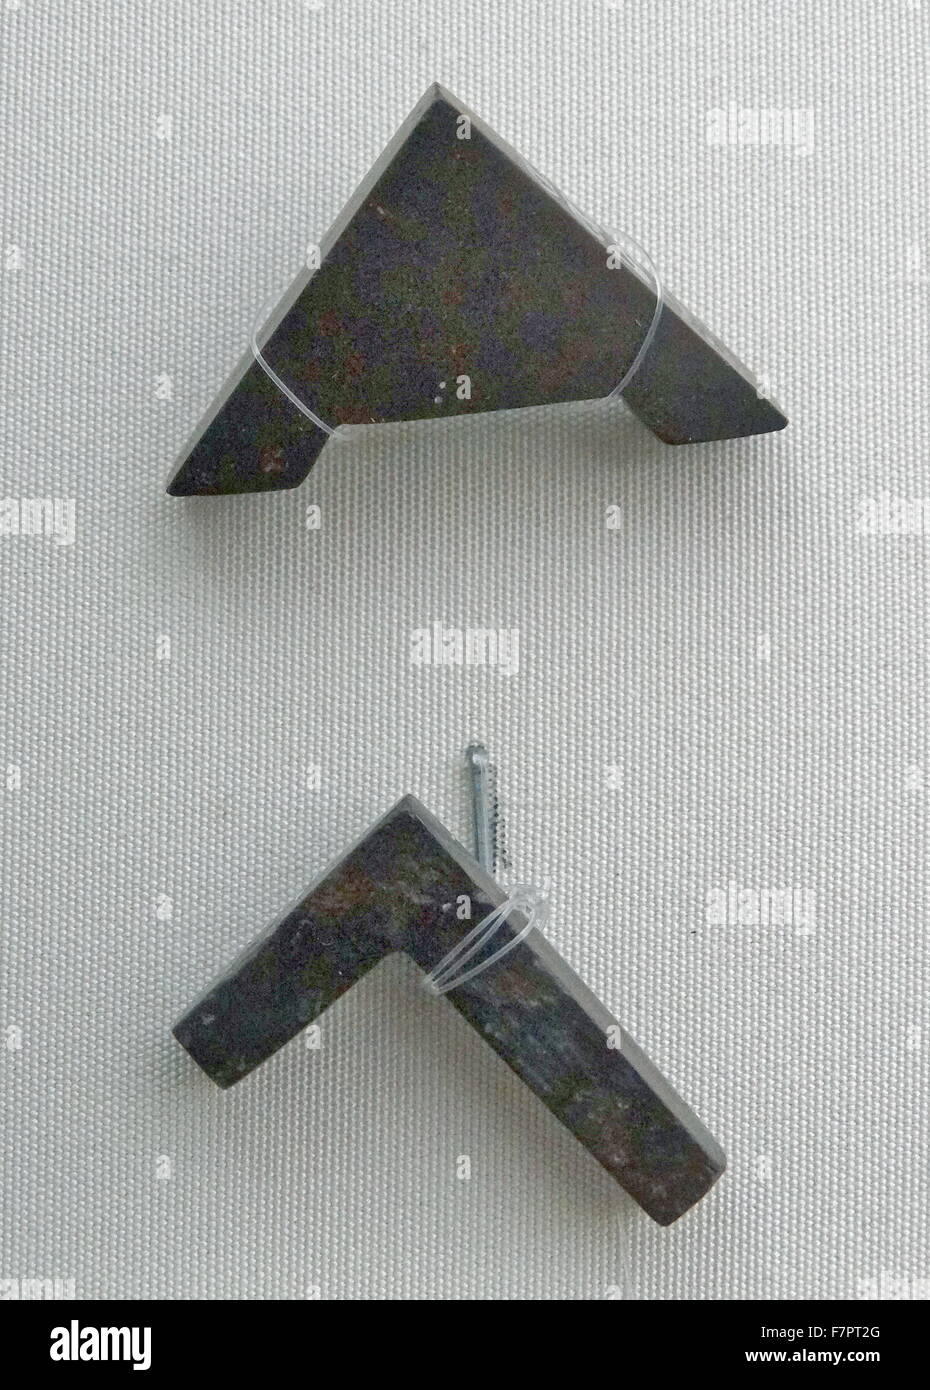 Plumb Bob and Set Square, symbols of accuracy and trueness, from ancient Egypt. Stock Photo